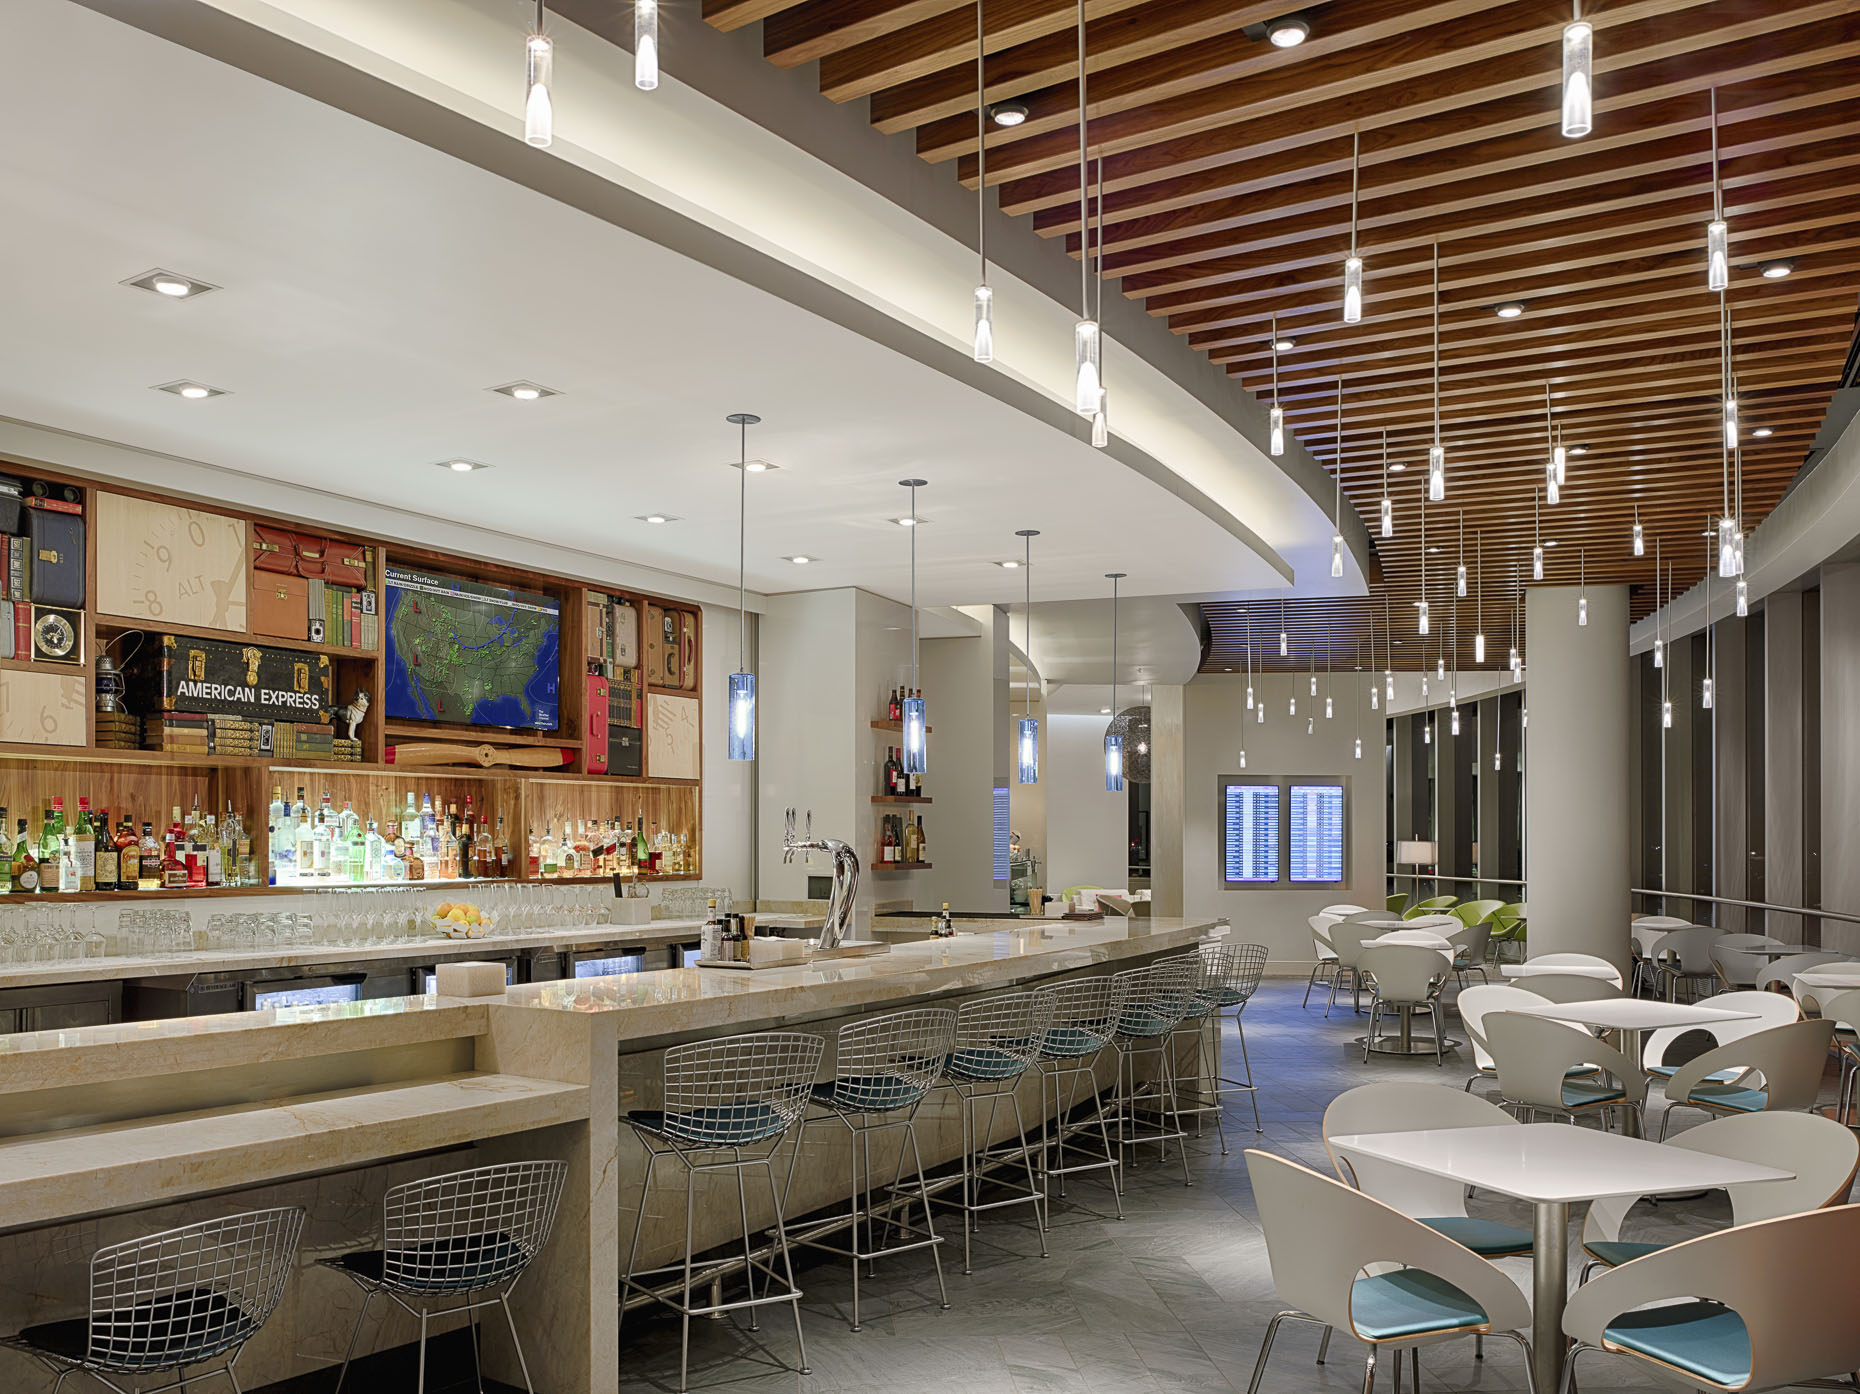 Miami International Airport AMEX Centurion Lounge for American Express photographed by Brad Feinknopf based in Columbus, Ohio